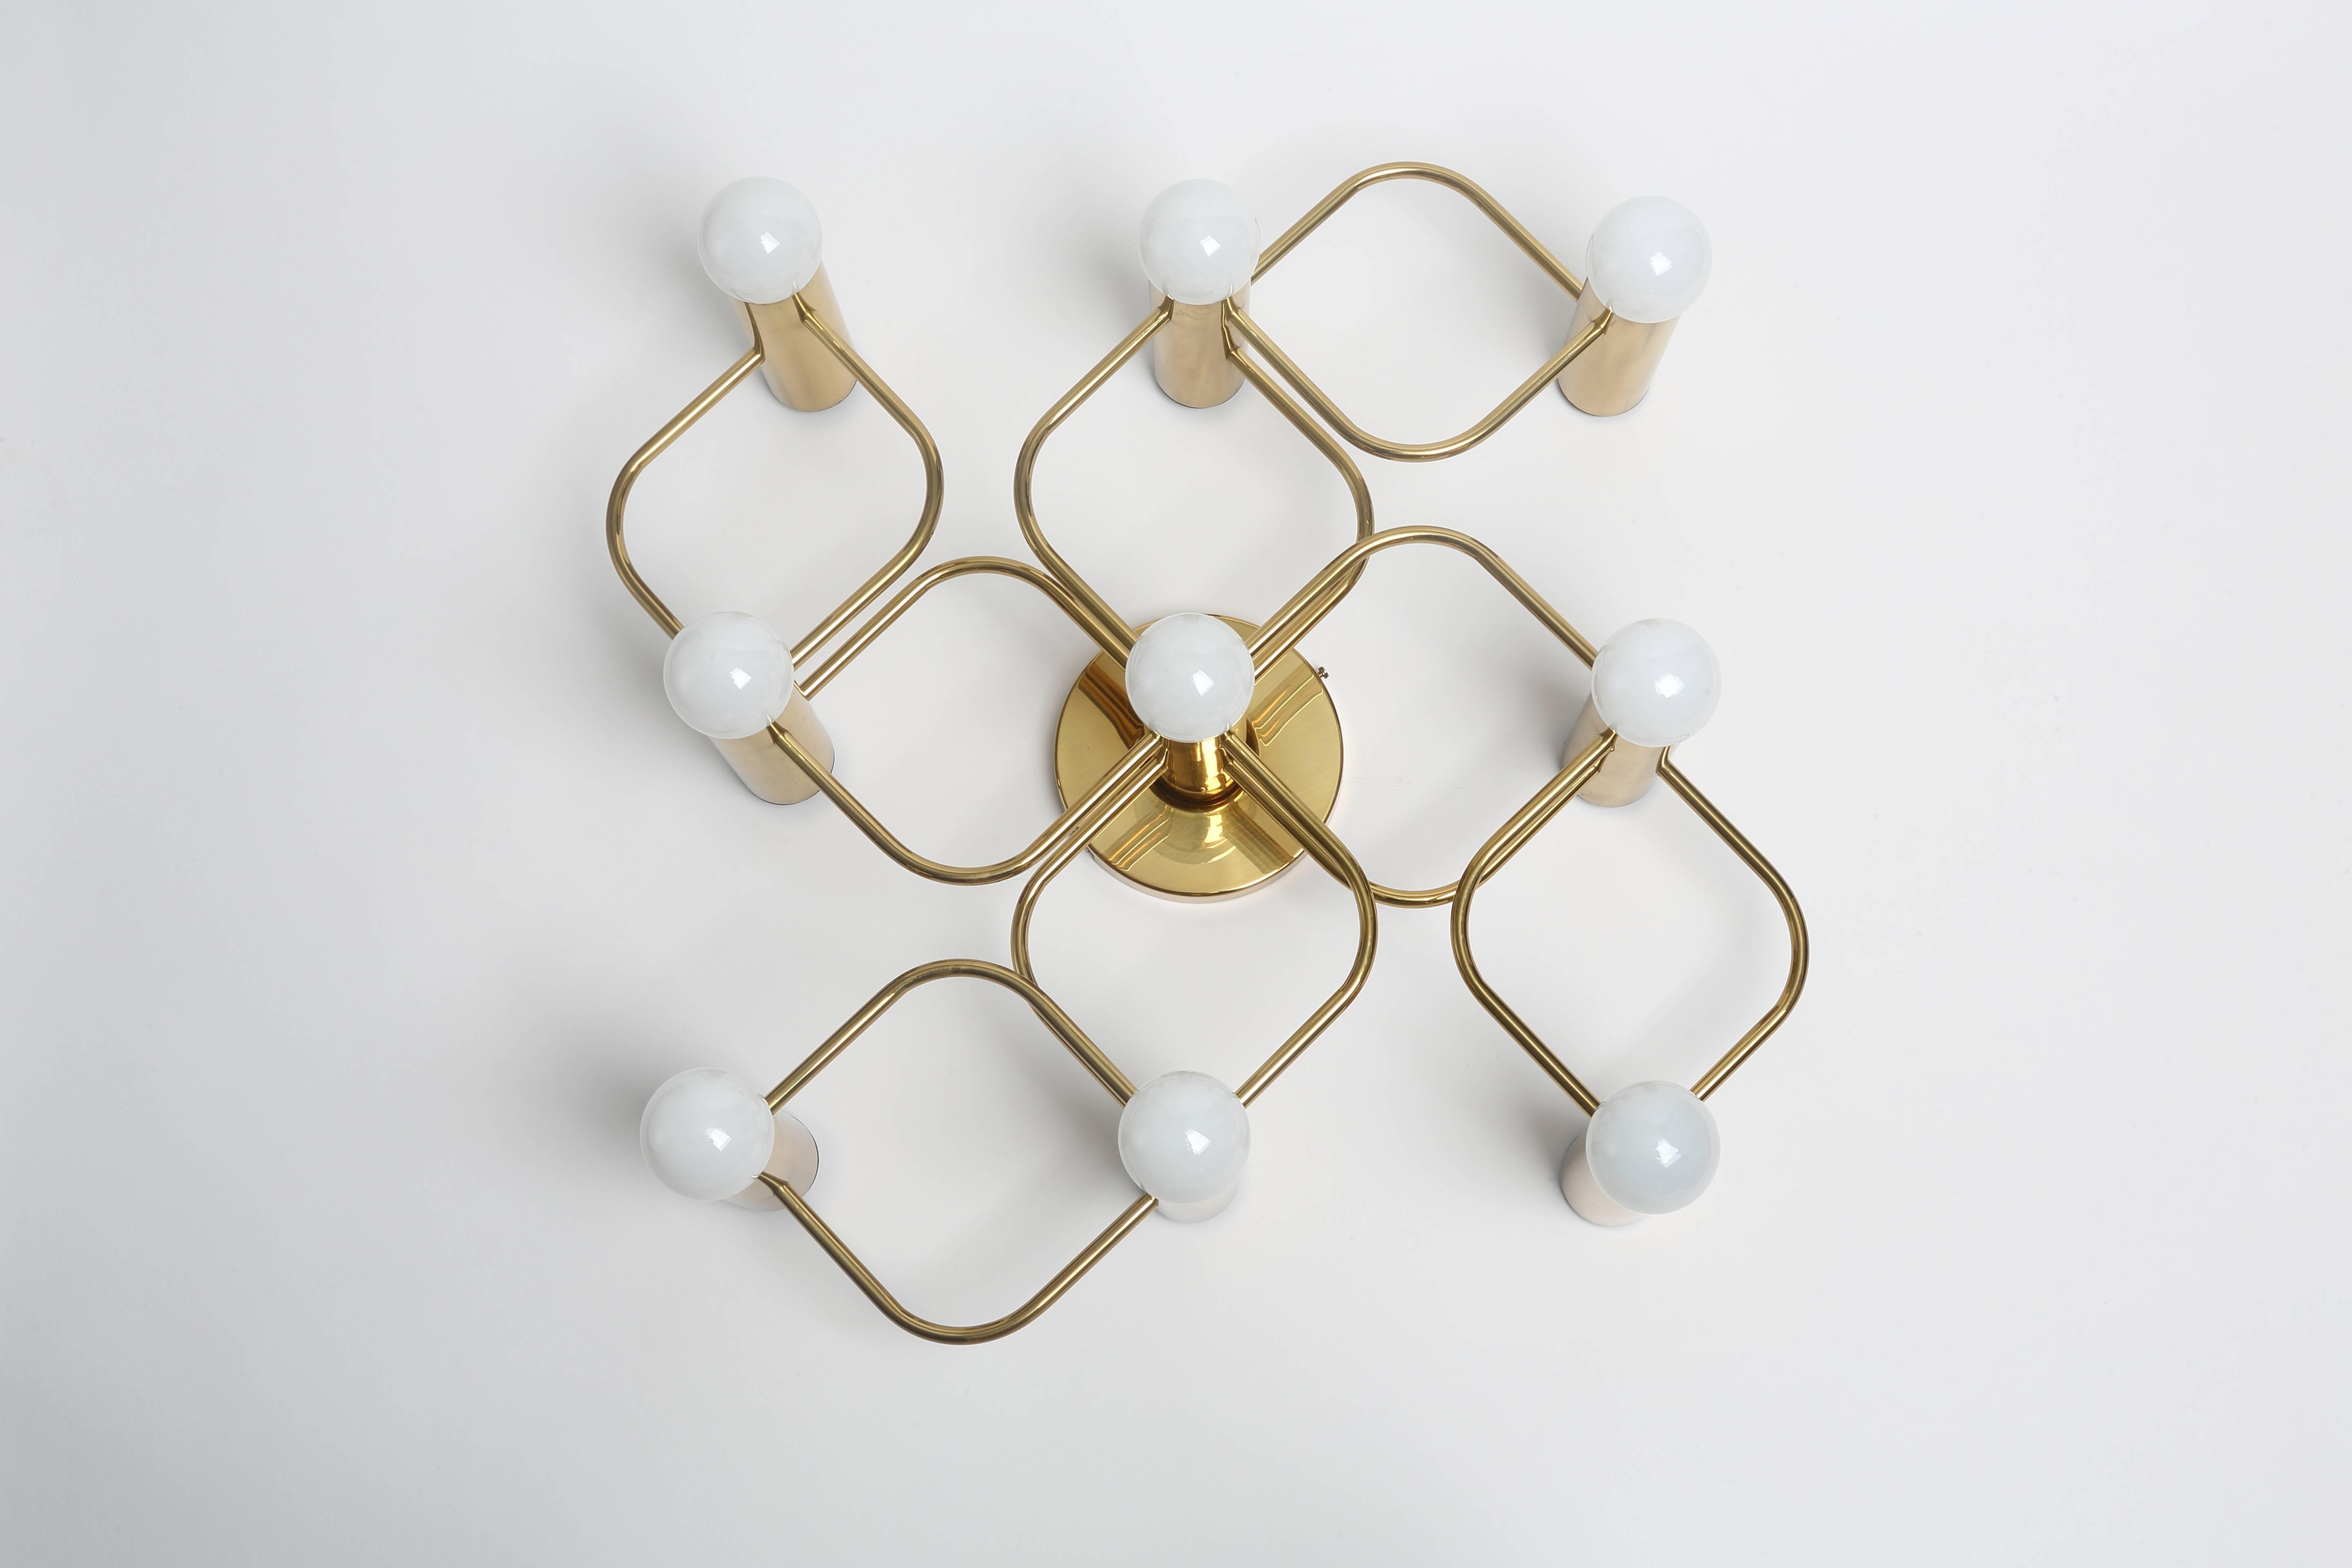 Sciolari style flush mount with nine lights.
Made with solid polished brass. Can be used as ceiling or wall light.